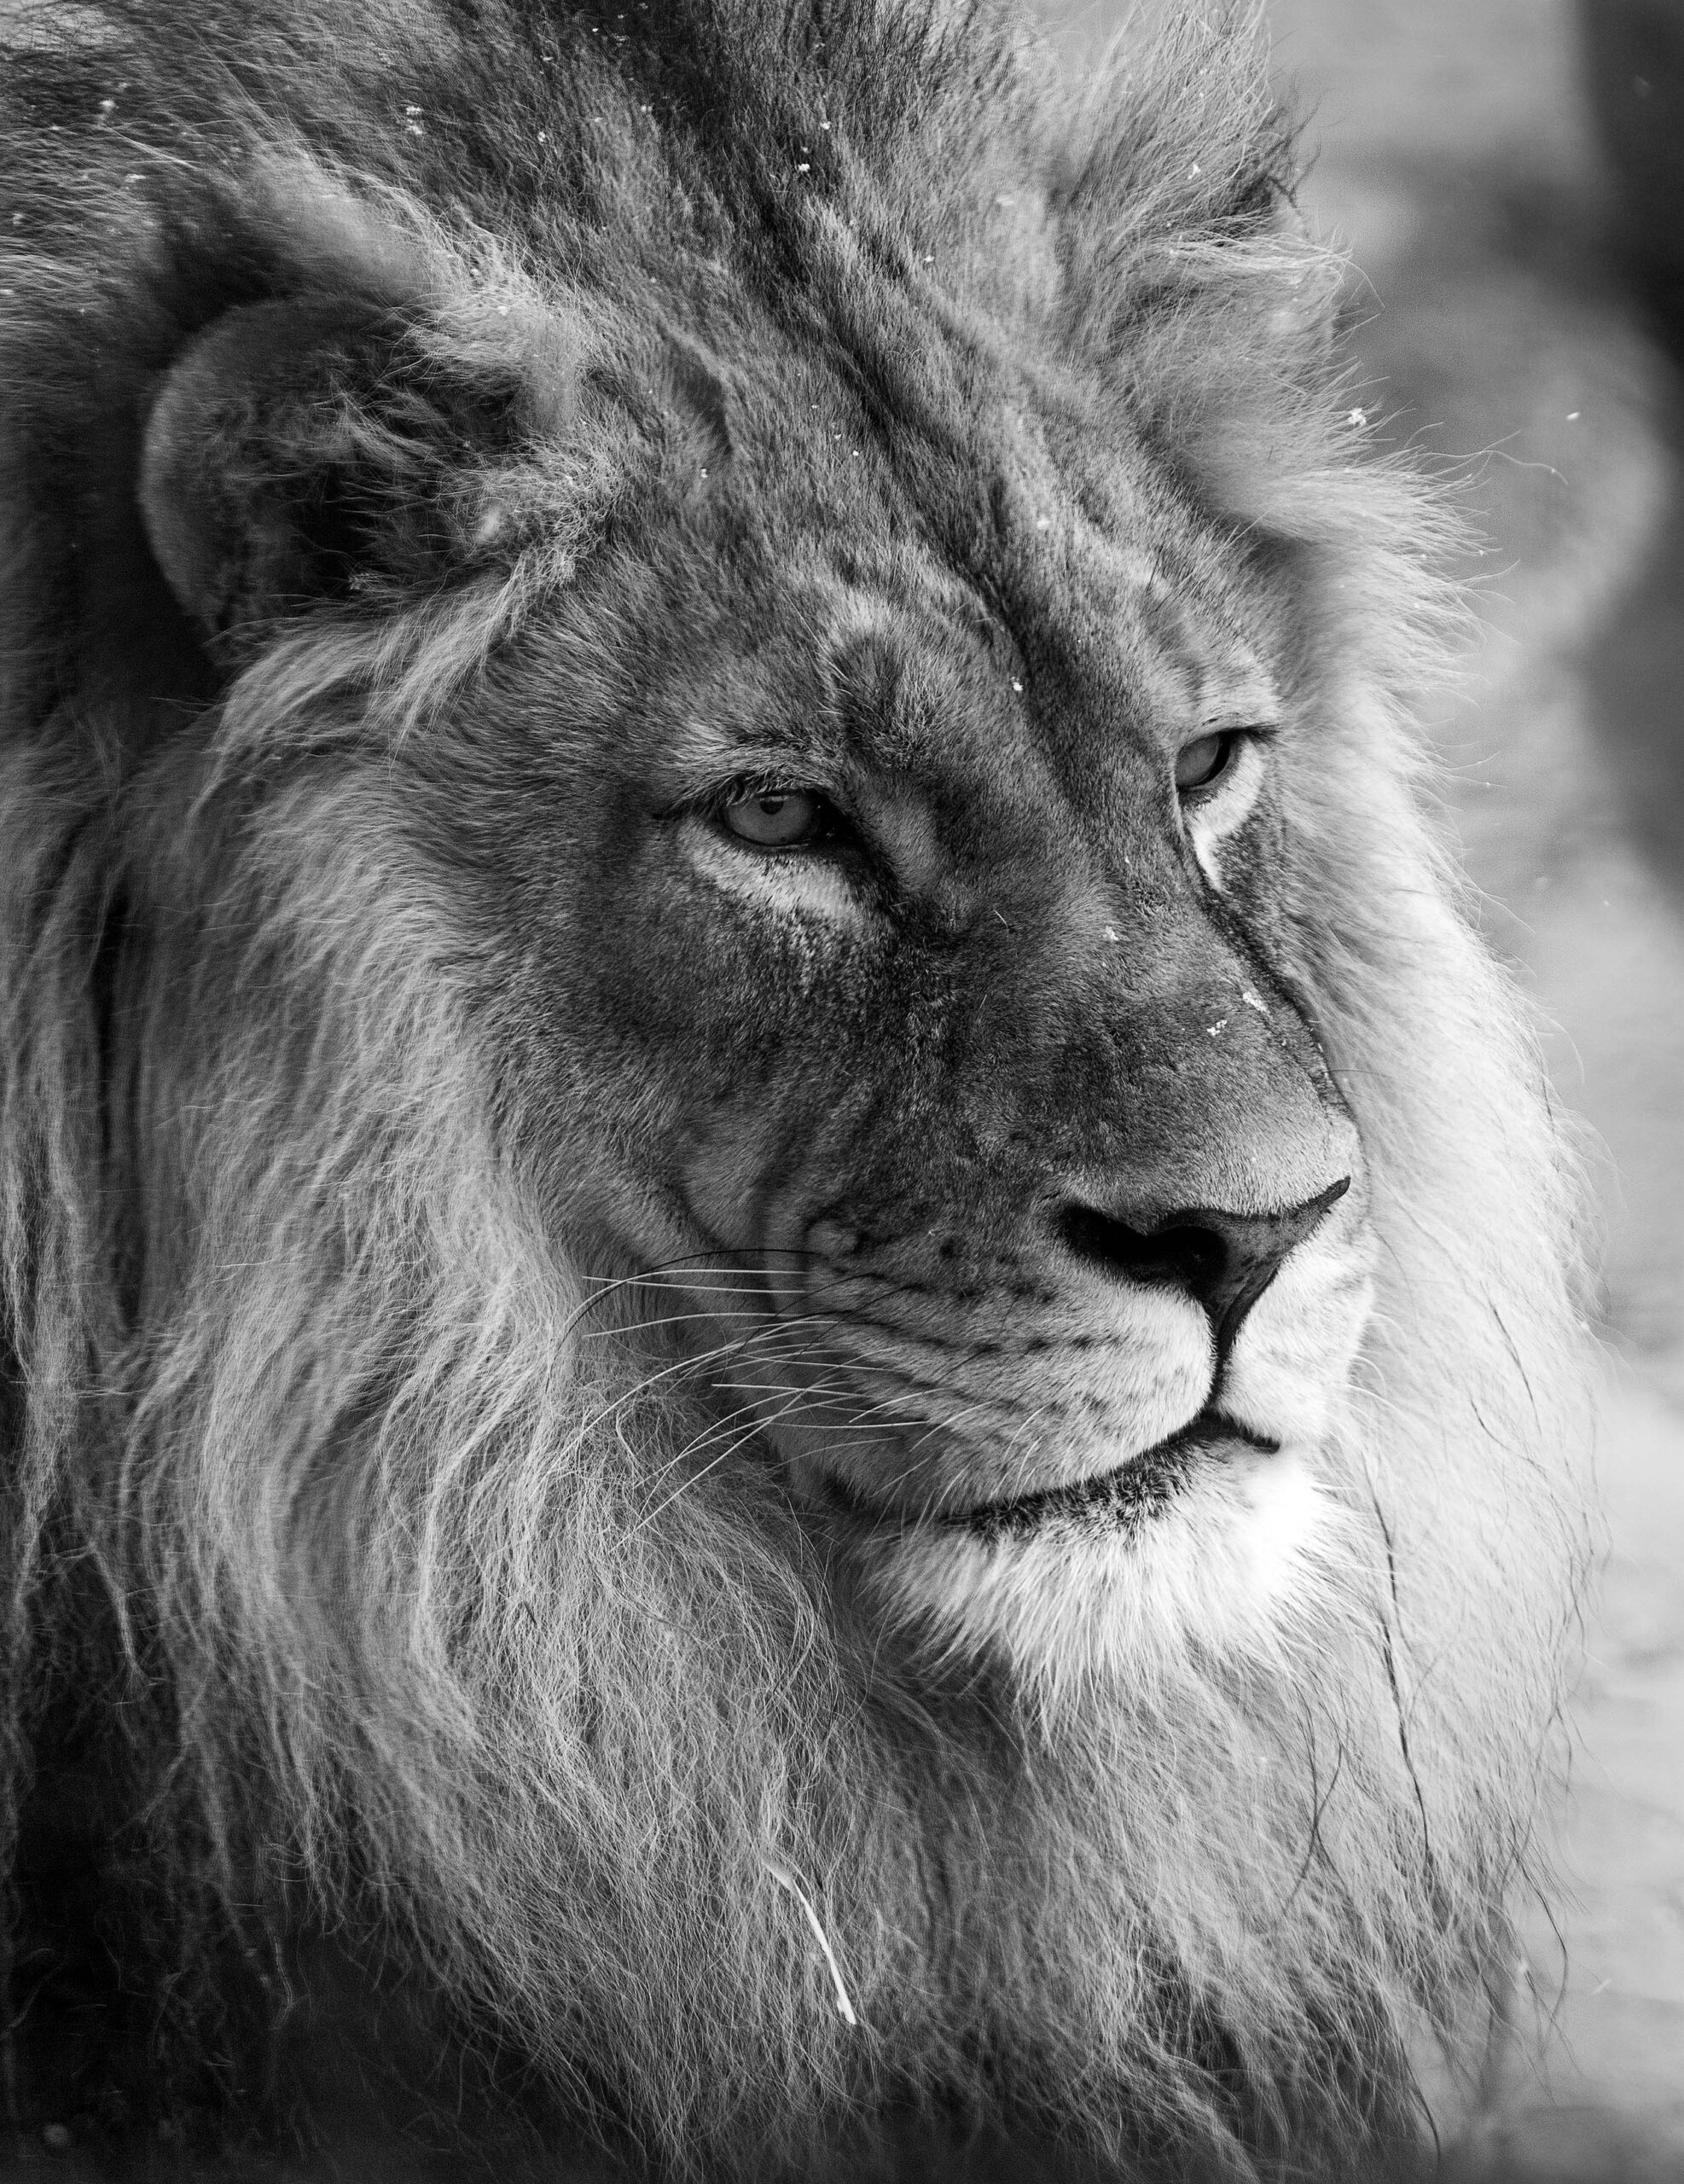 Male lion at Utah's Hogle Zoo in black and white.